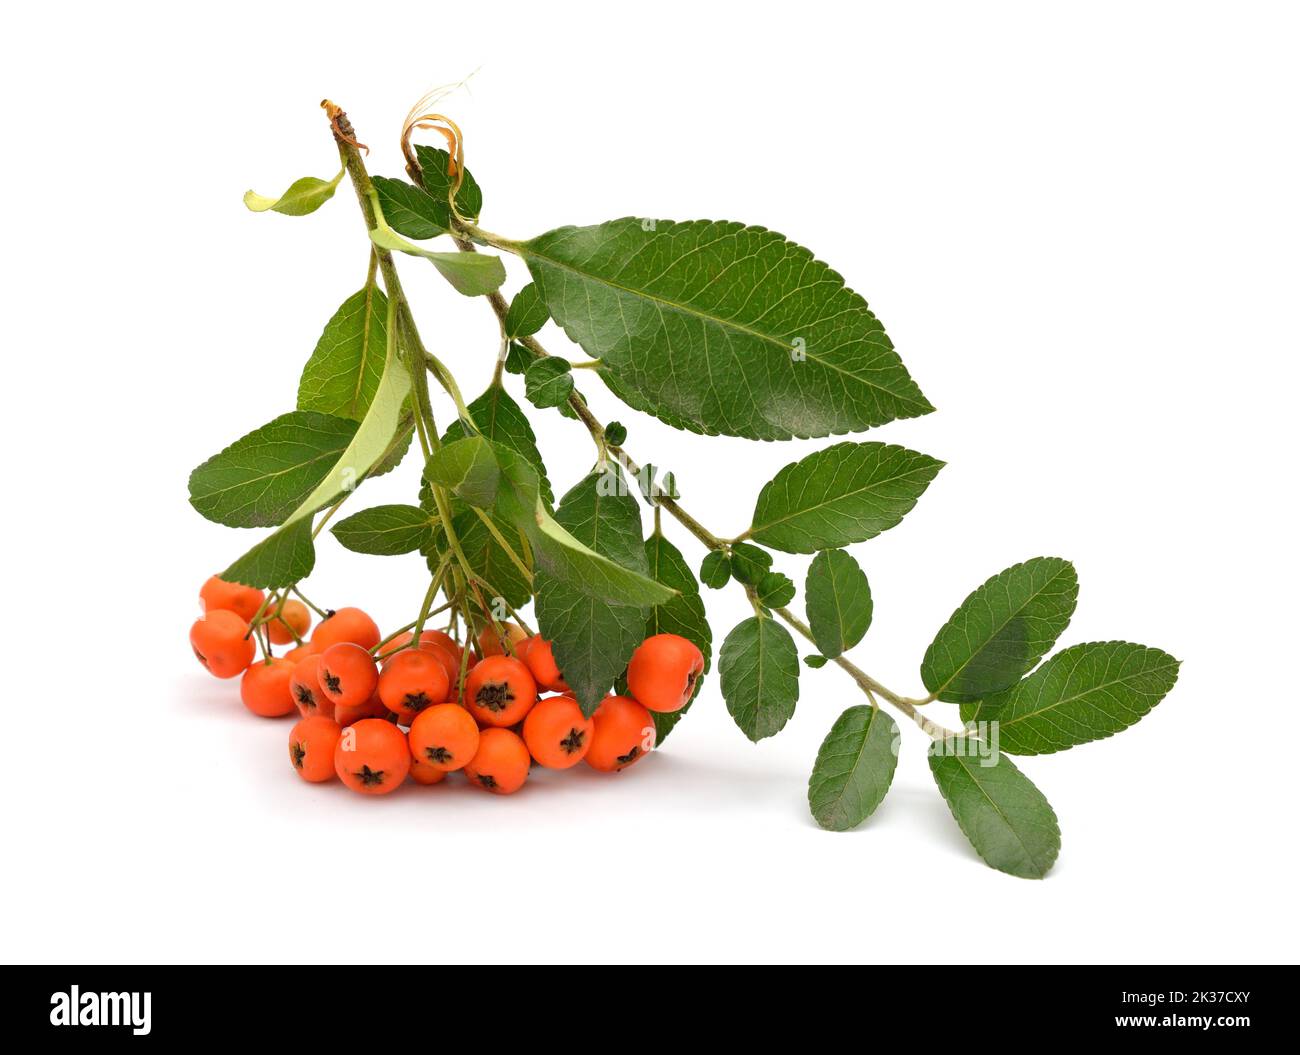 Pyracantha, common names firethorn or pyracantha. Isolated on white background Stock Photo